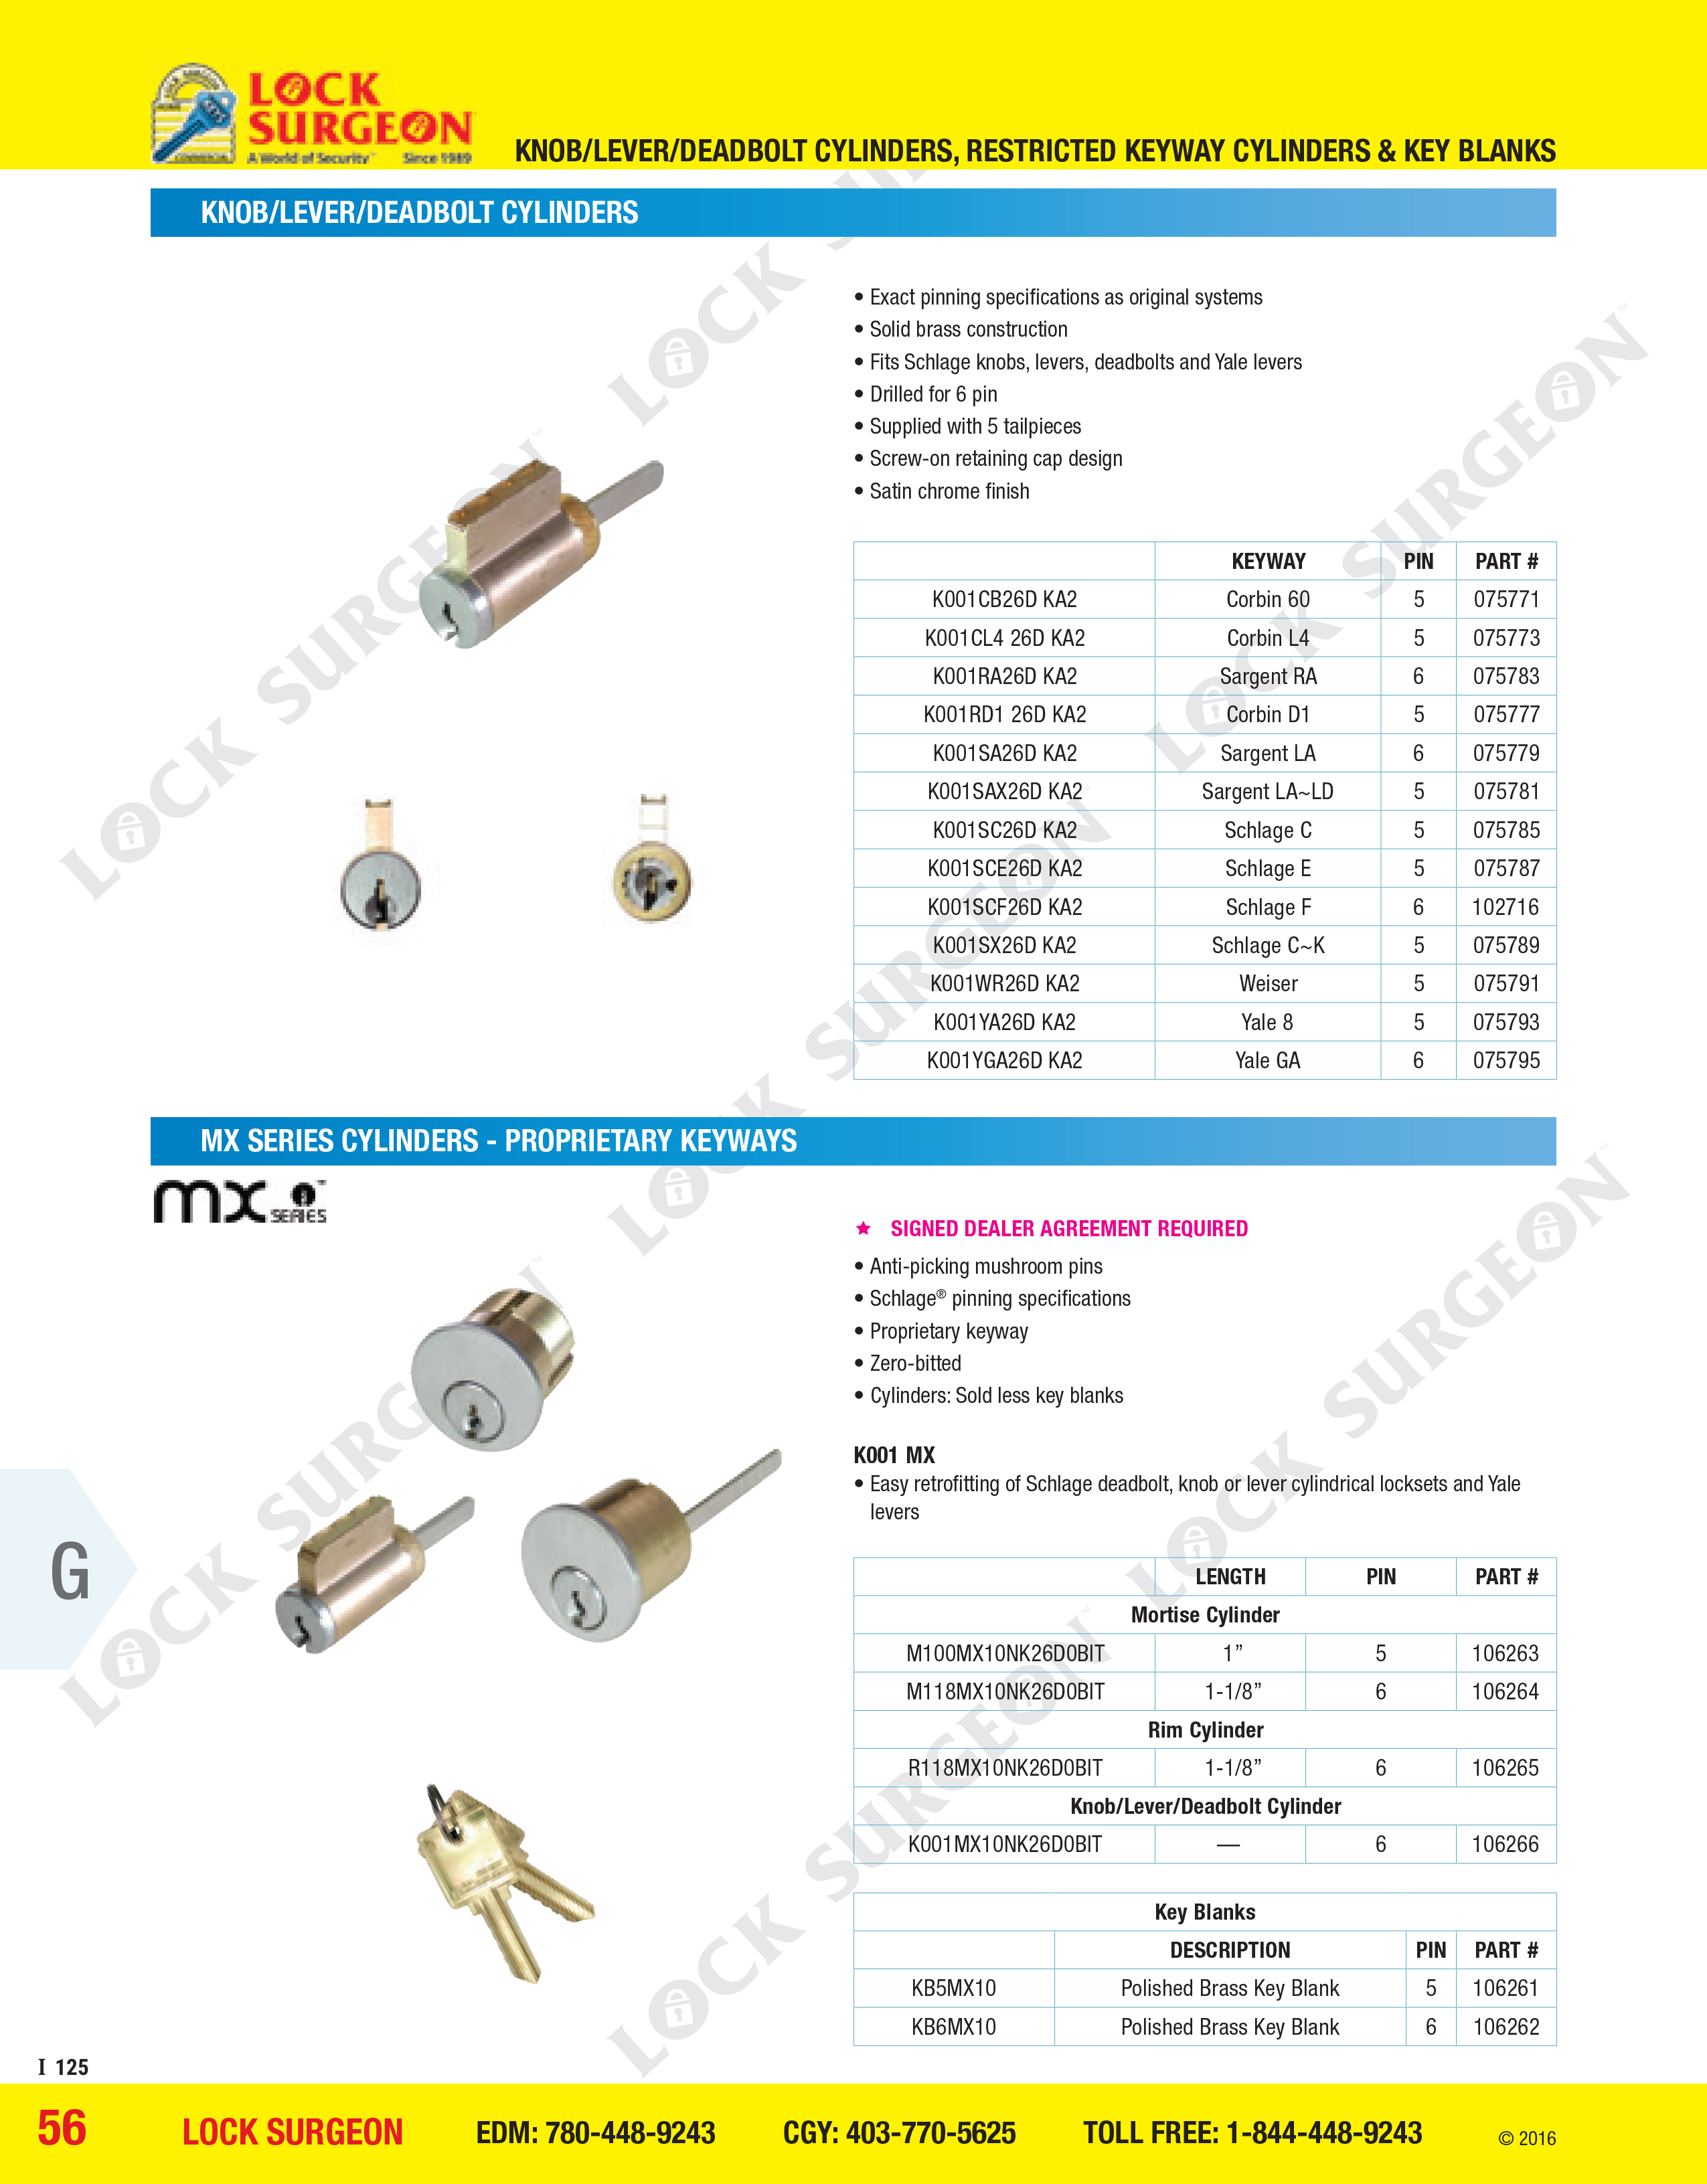 GMS knob lever deadbolt cylinders restricted keyway cylinders and key blanks.